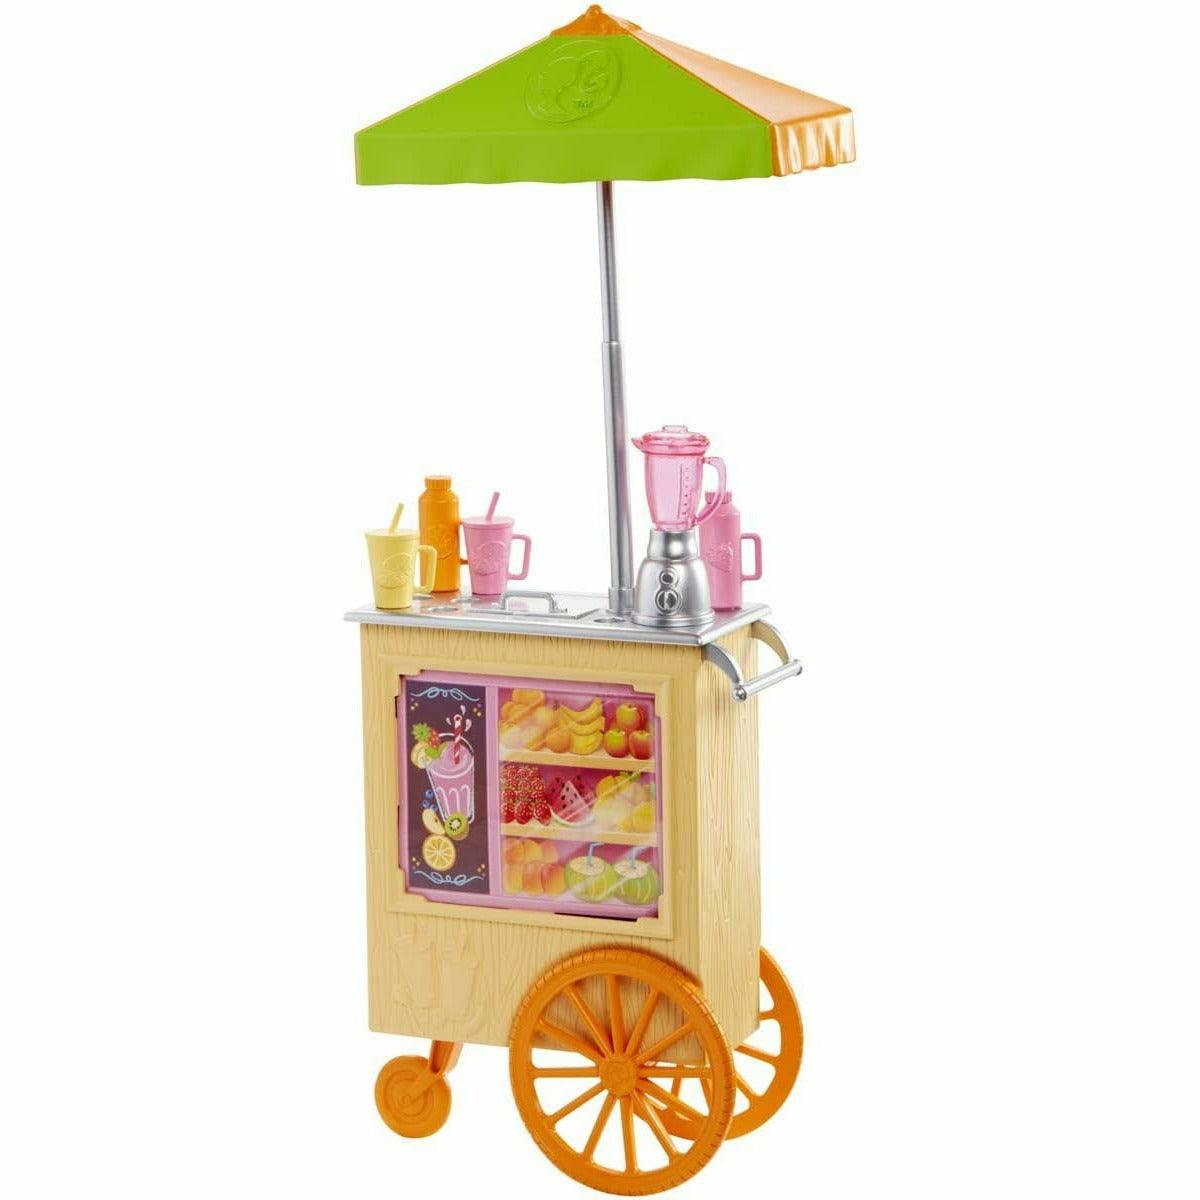 Barbie Careers Juice Bar Playset with Brunette Doll - BumbleToys - 5-7 Years, Barbie, Dolls, Fashion Dolls & Accessories, Girls, Miniature Dolls & Accessories, OXE, Pre-Order